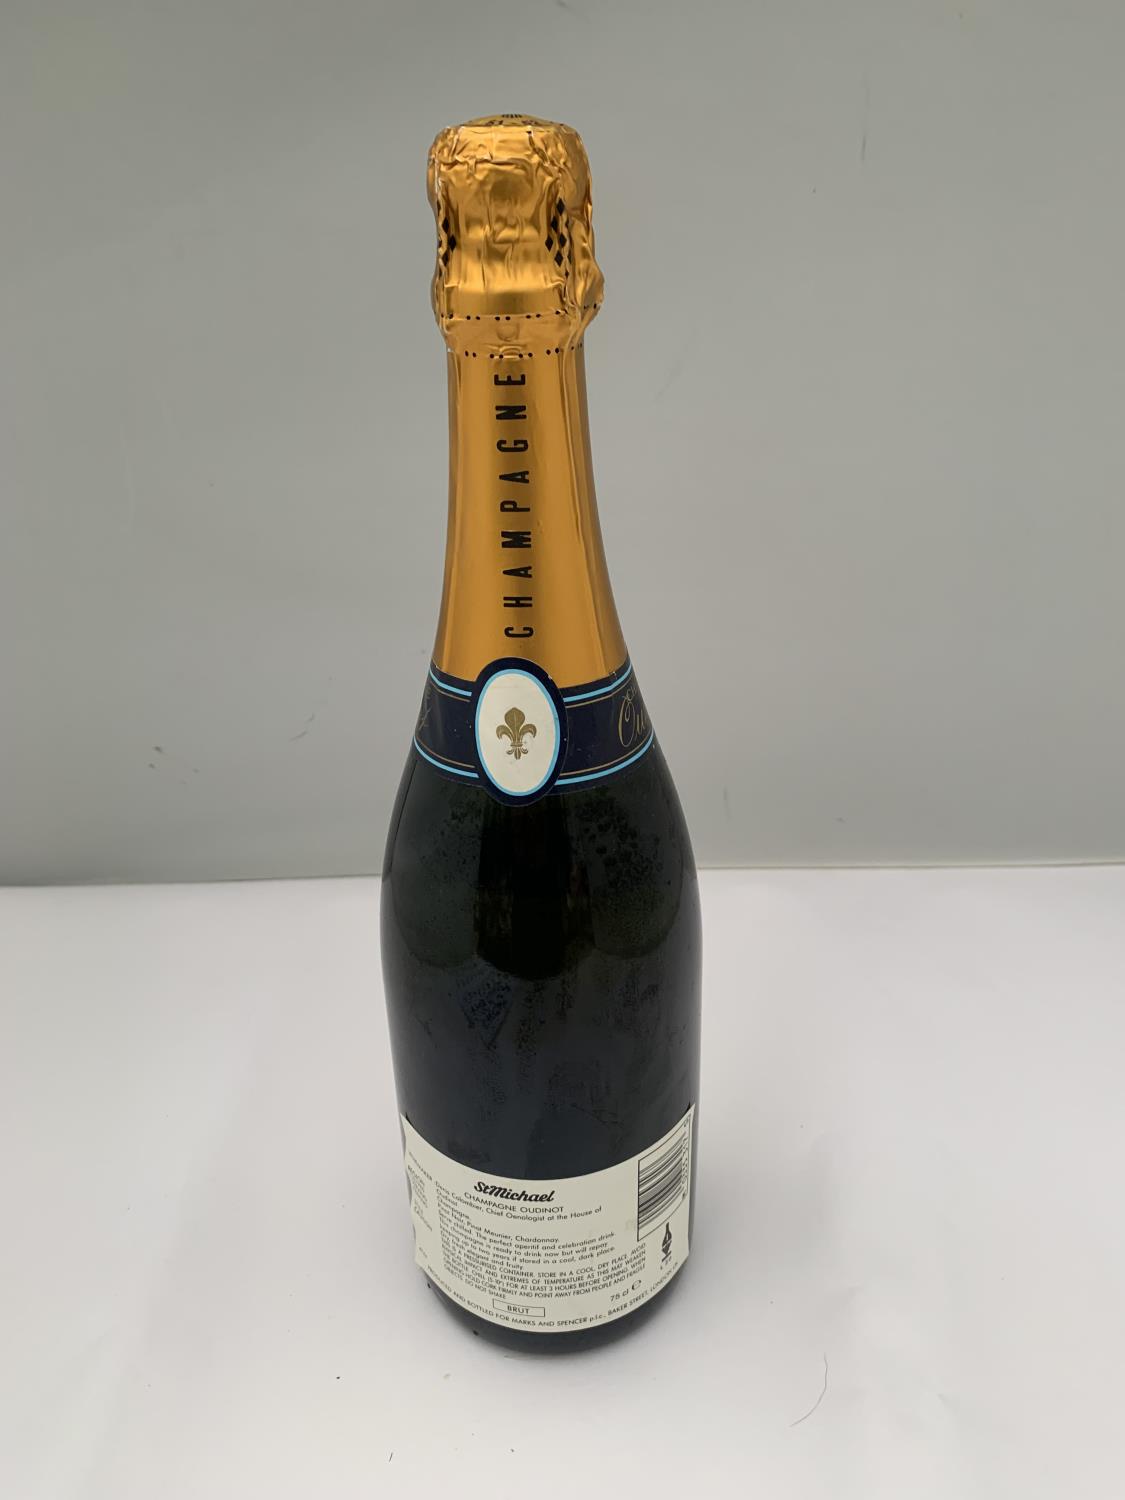 A BOTTLE OF OUDINOT EPERNAY CUVEE BRUT CHAMPAGNE - Image 3 of 3